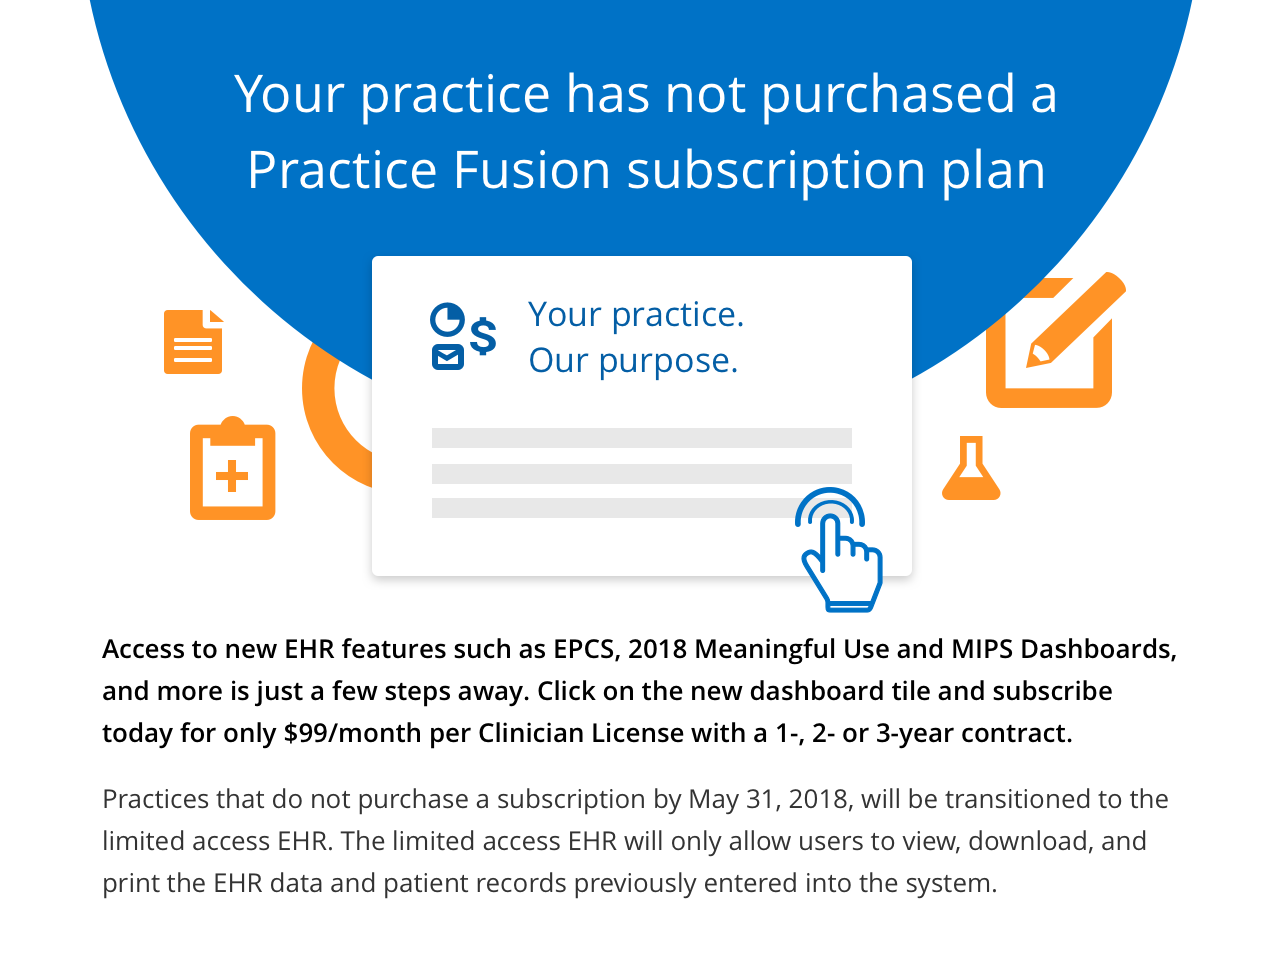 Access to new EHR features such as EPCS, 2018 Meaningful Use and MIPS Dashboards, and more is just a few steps away. Click on the new dashboard tile and subscribe today for only $99/month per Clinician License with a 1-, 2- or 3-year contract.